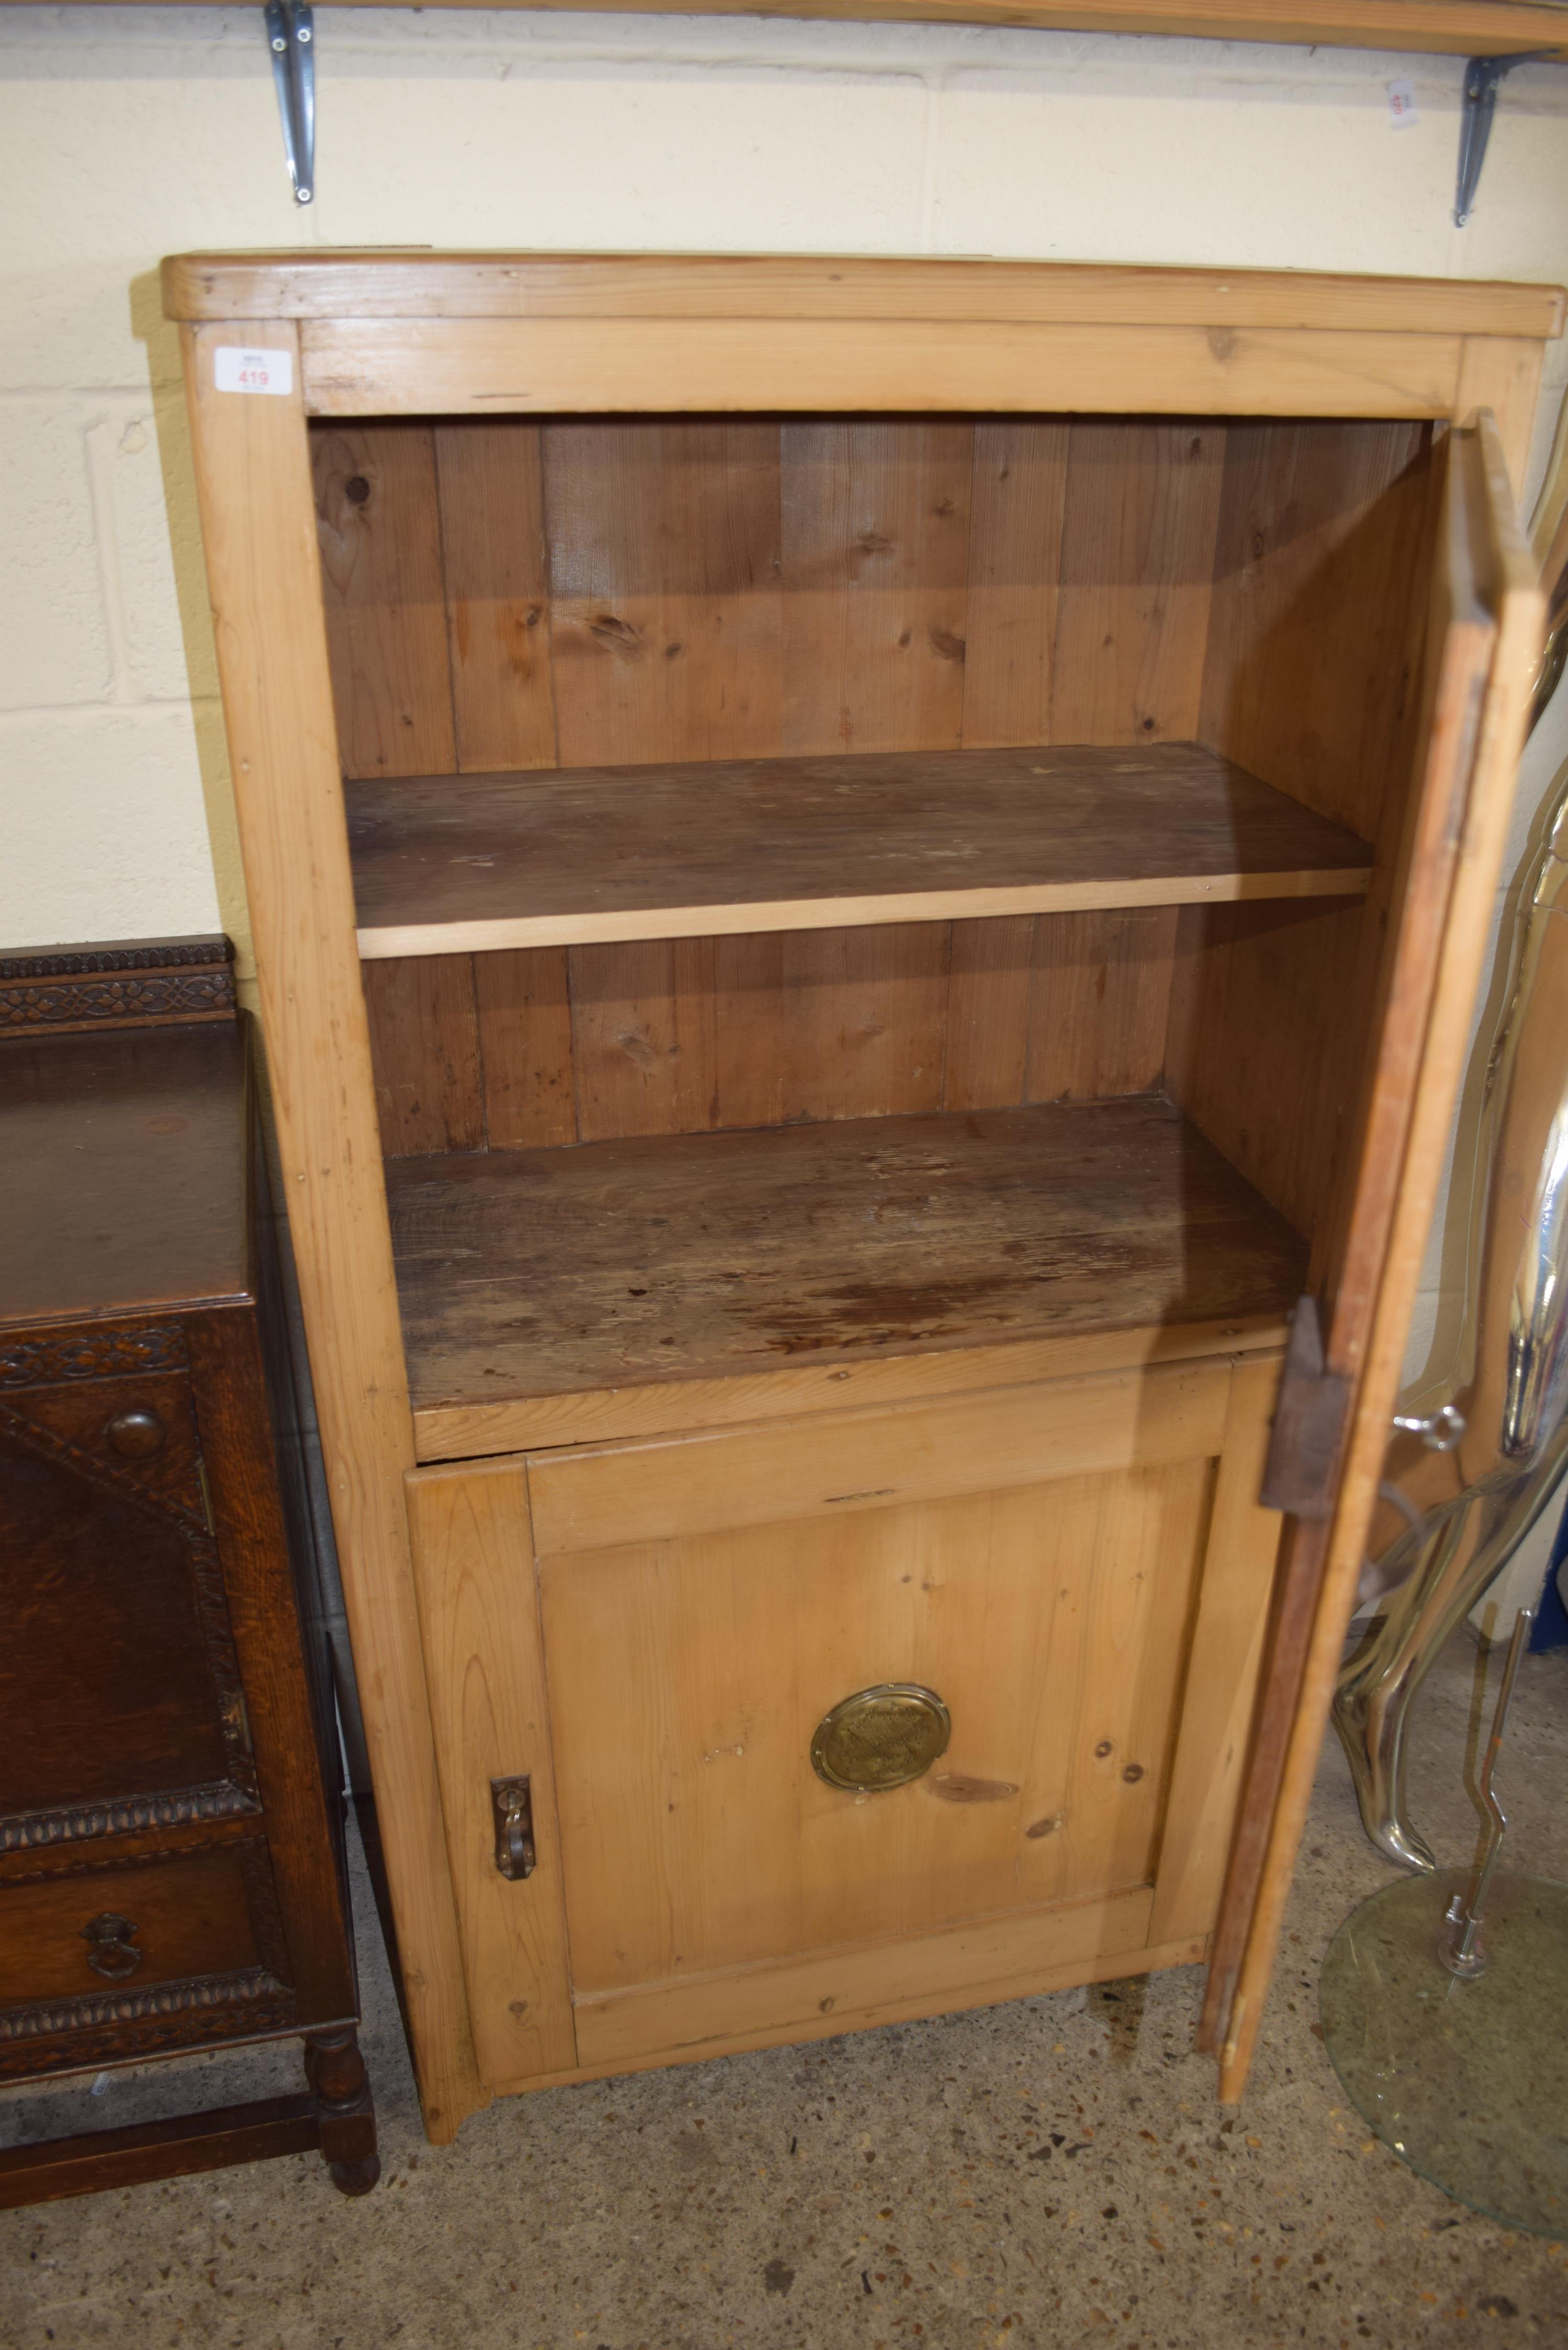 VINTAGE PINE TWO-DOOR KITCHEN CABINET, THE DOORS FITTED WITH VENTILATION, 150CM HIGH - Image 2 of 2